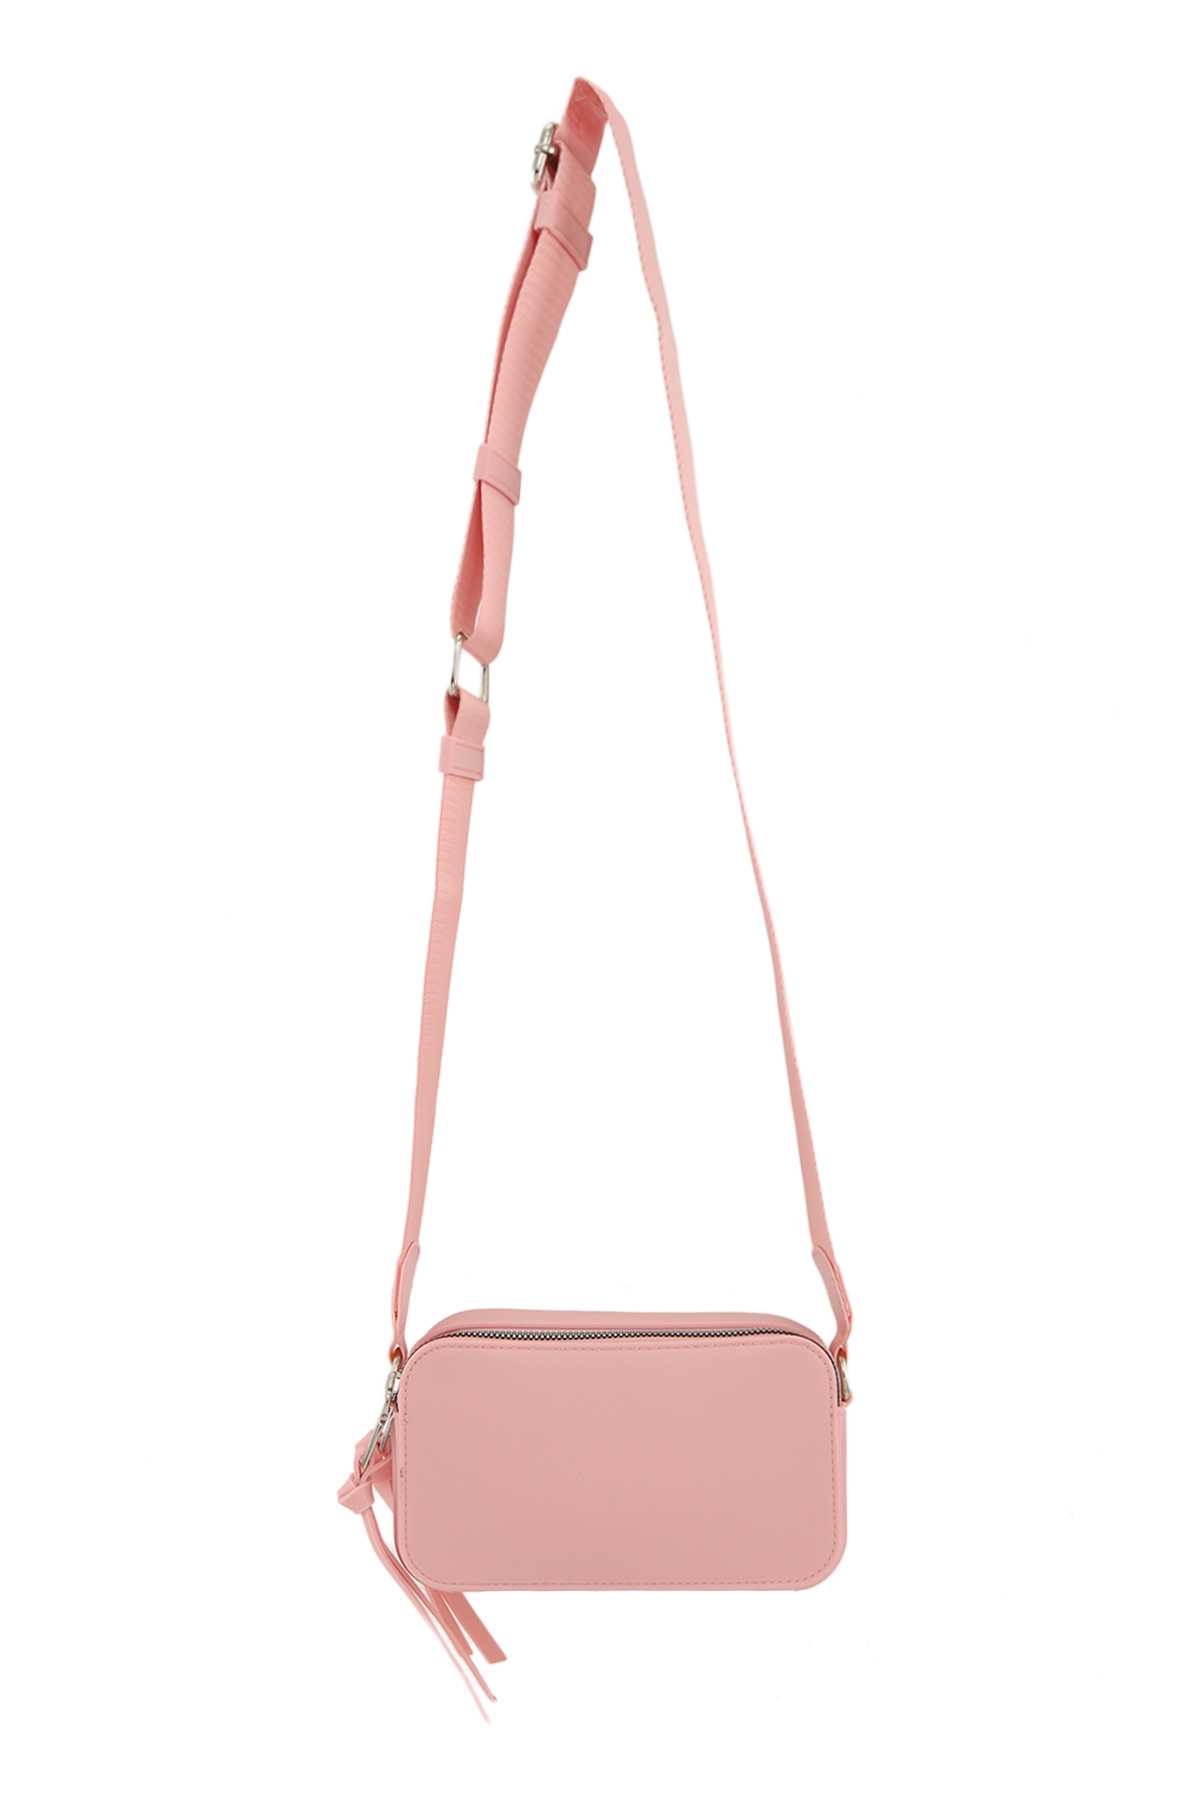 Small Textured Jelly Hand Bag with Polyester Strap